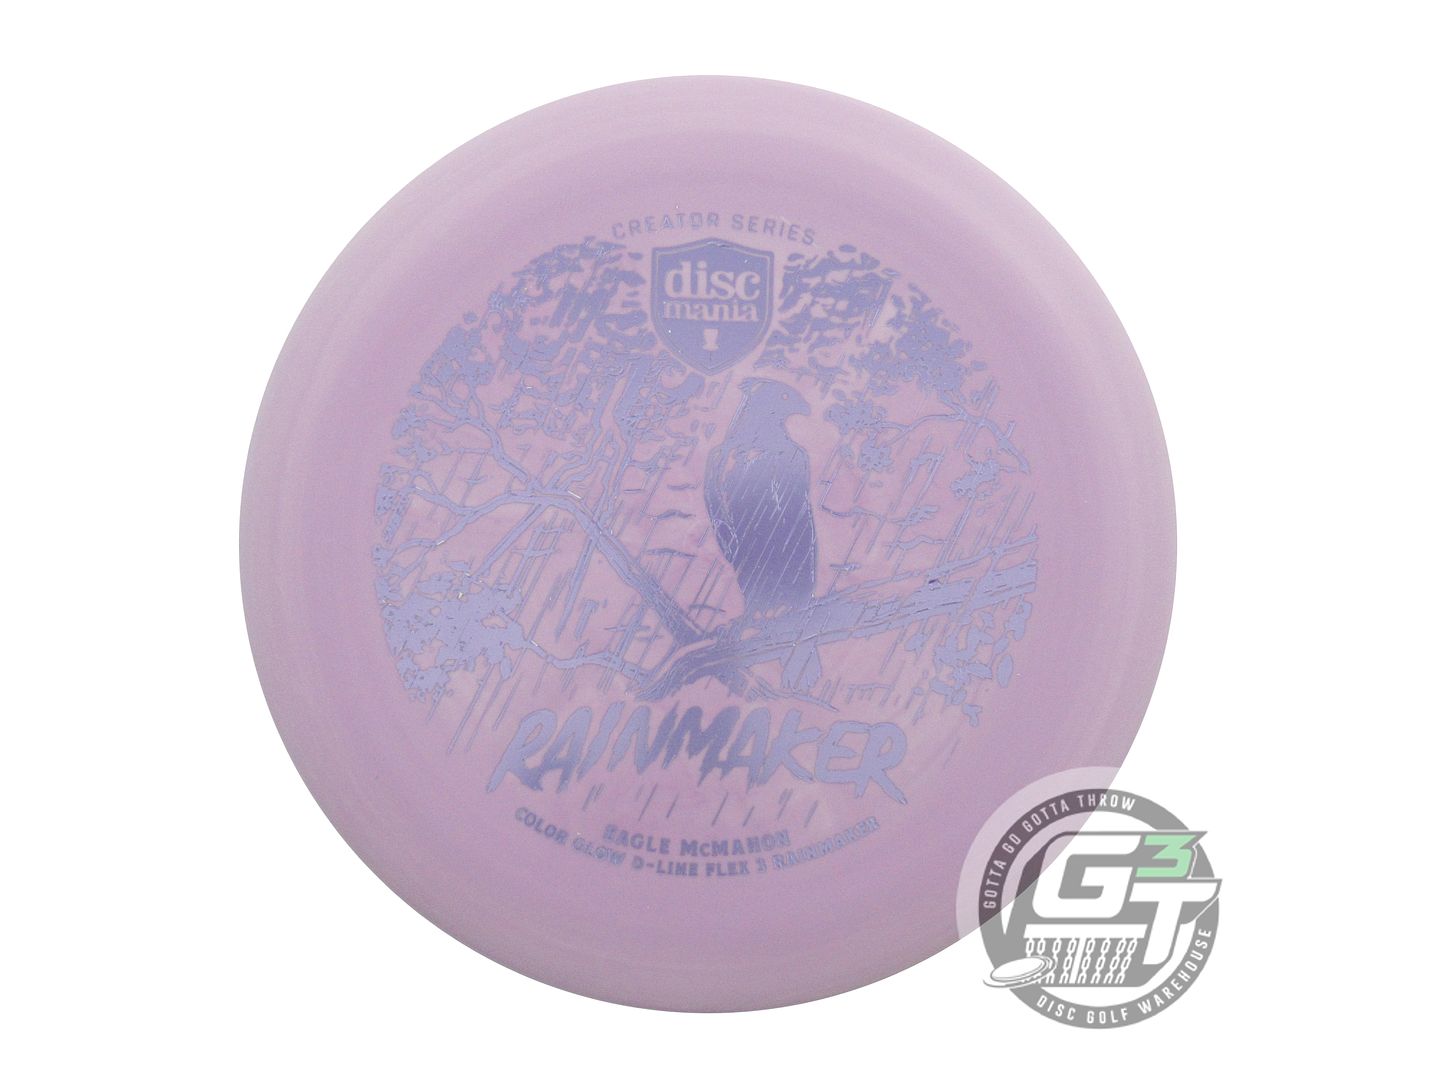 Discmania Limited Edition Triumph Series Eagle McMahon 2023 Putting World Champion Color Glow D-Line Flex 3 Rainmaker Putter Golf Disc (Individually Listed)